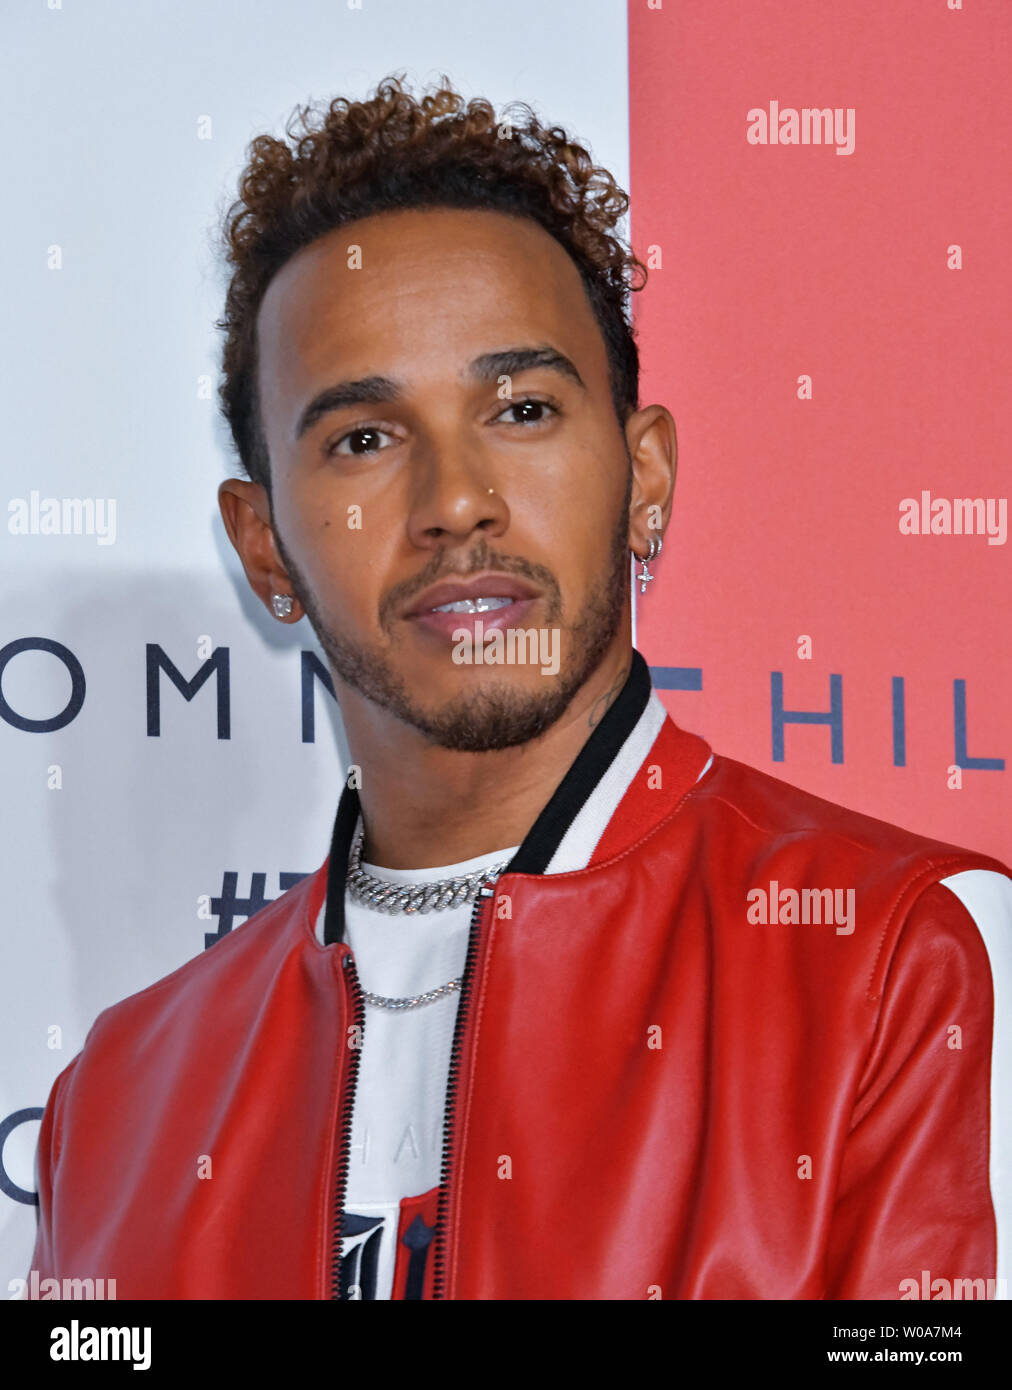 Racing driver Lewis Hamilton attend the event 